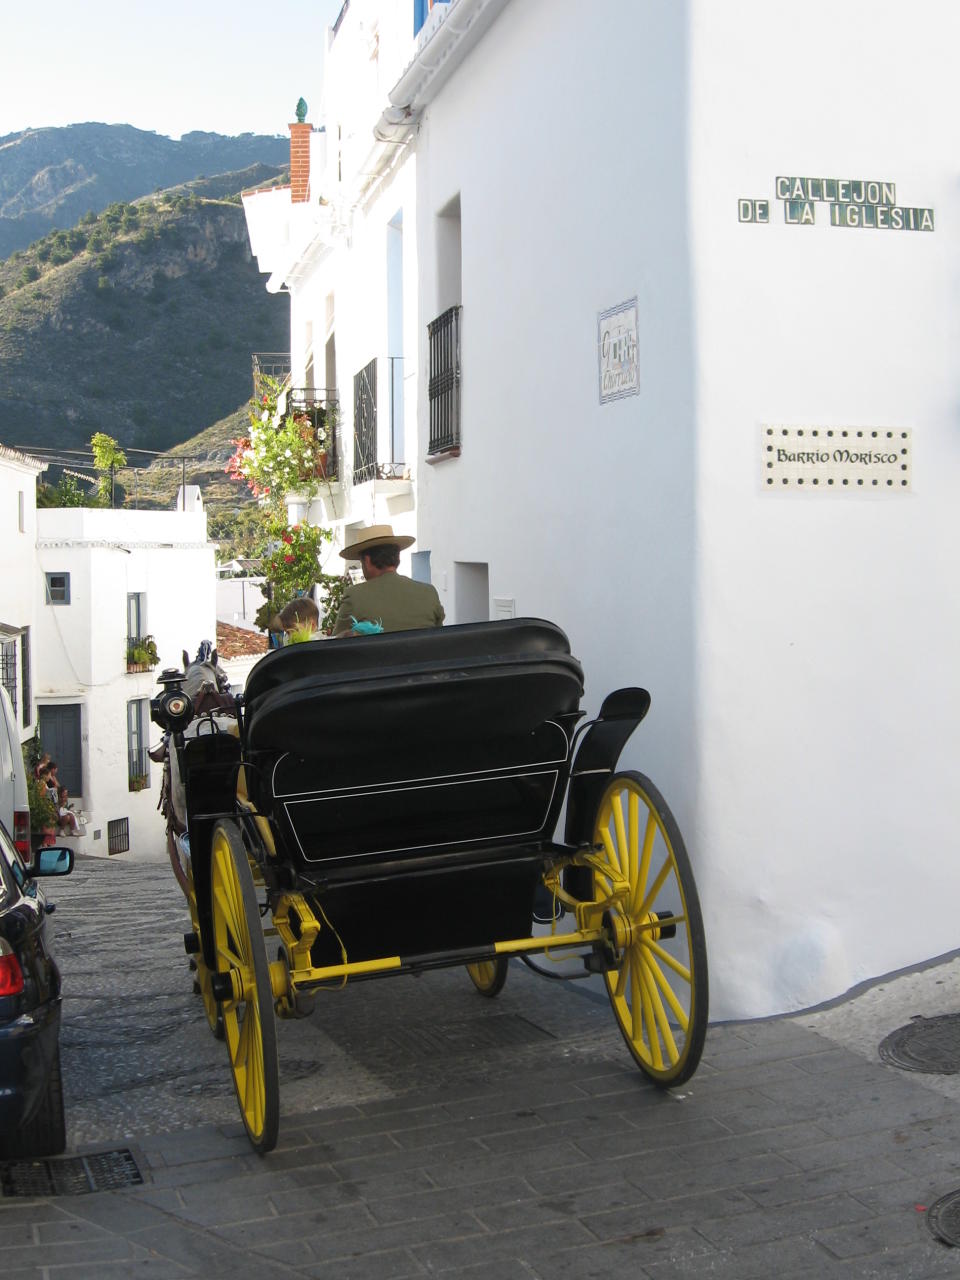 This June 1, 2013 photo shows wedding guests leaving a church by horse carriage in Frigiliana, Spain. Frigiliana is one of Spain's "pueblos blancos," or white villages that sit high above the Mediterranean coast. (AP Photo/Giovanna Dell’Orto)